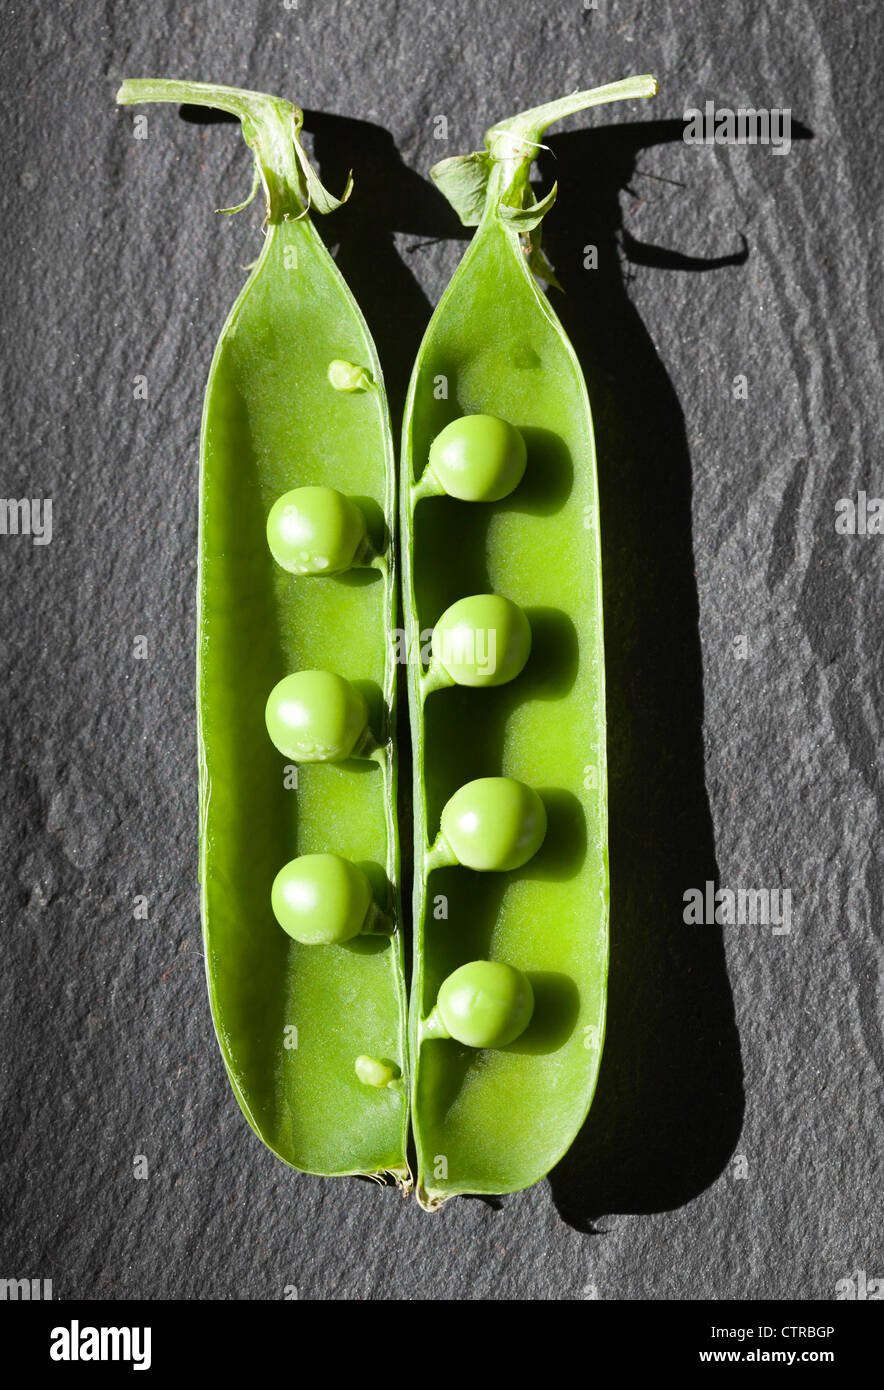 Fresh peas in their pods Stock Photo